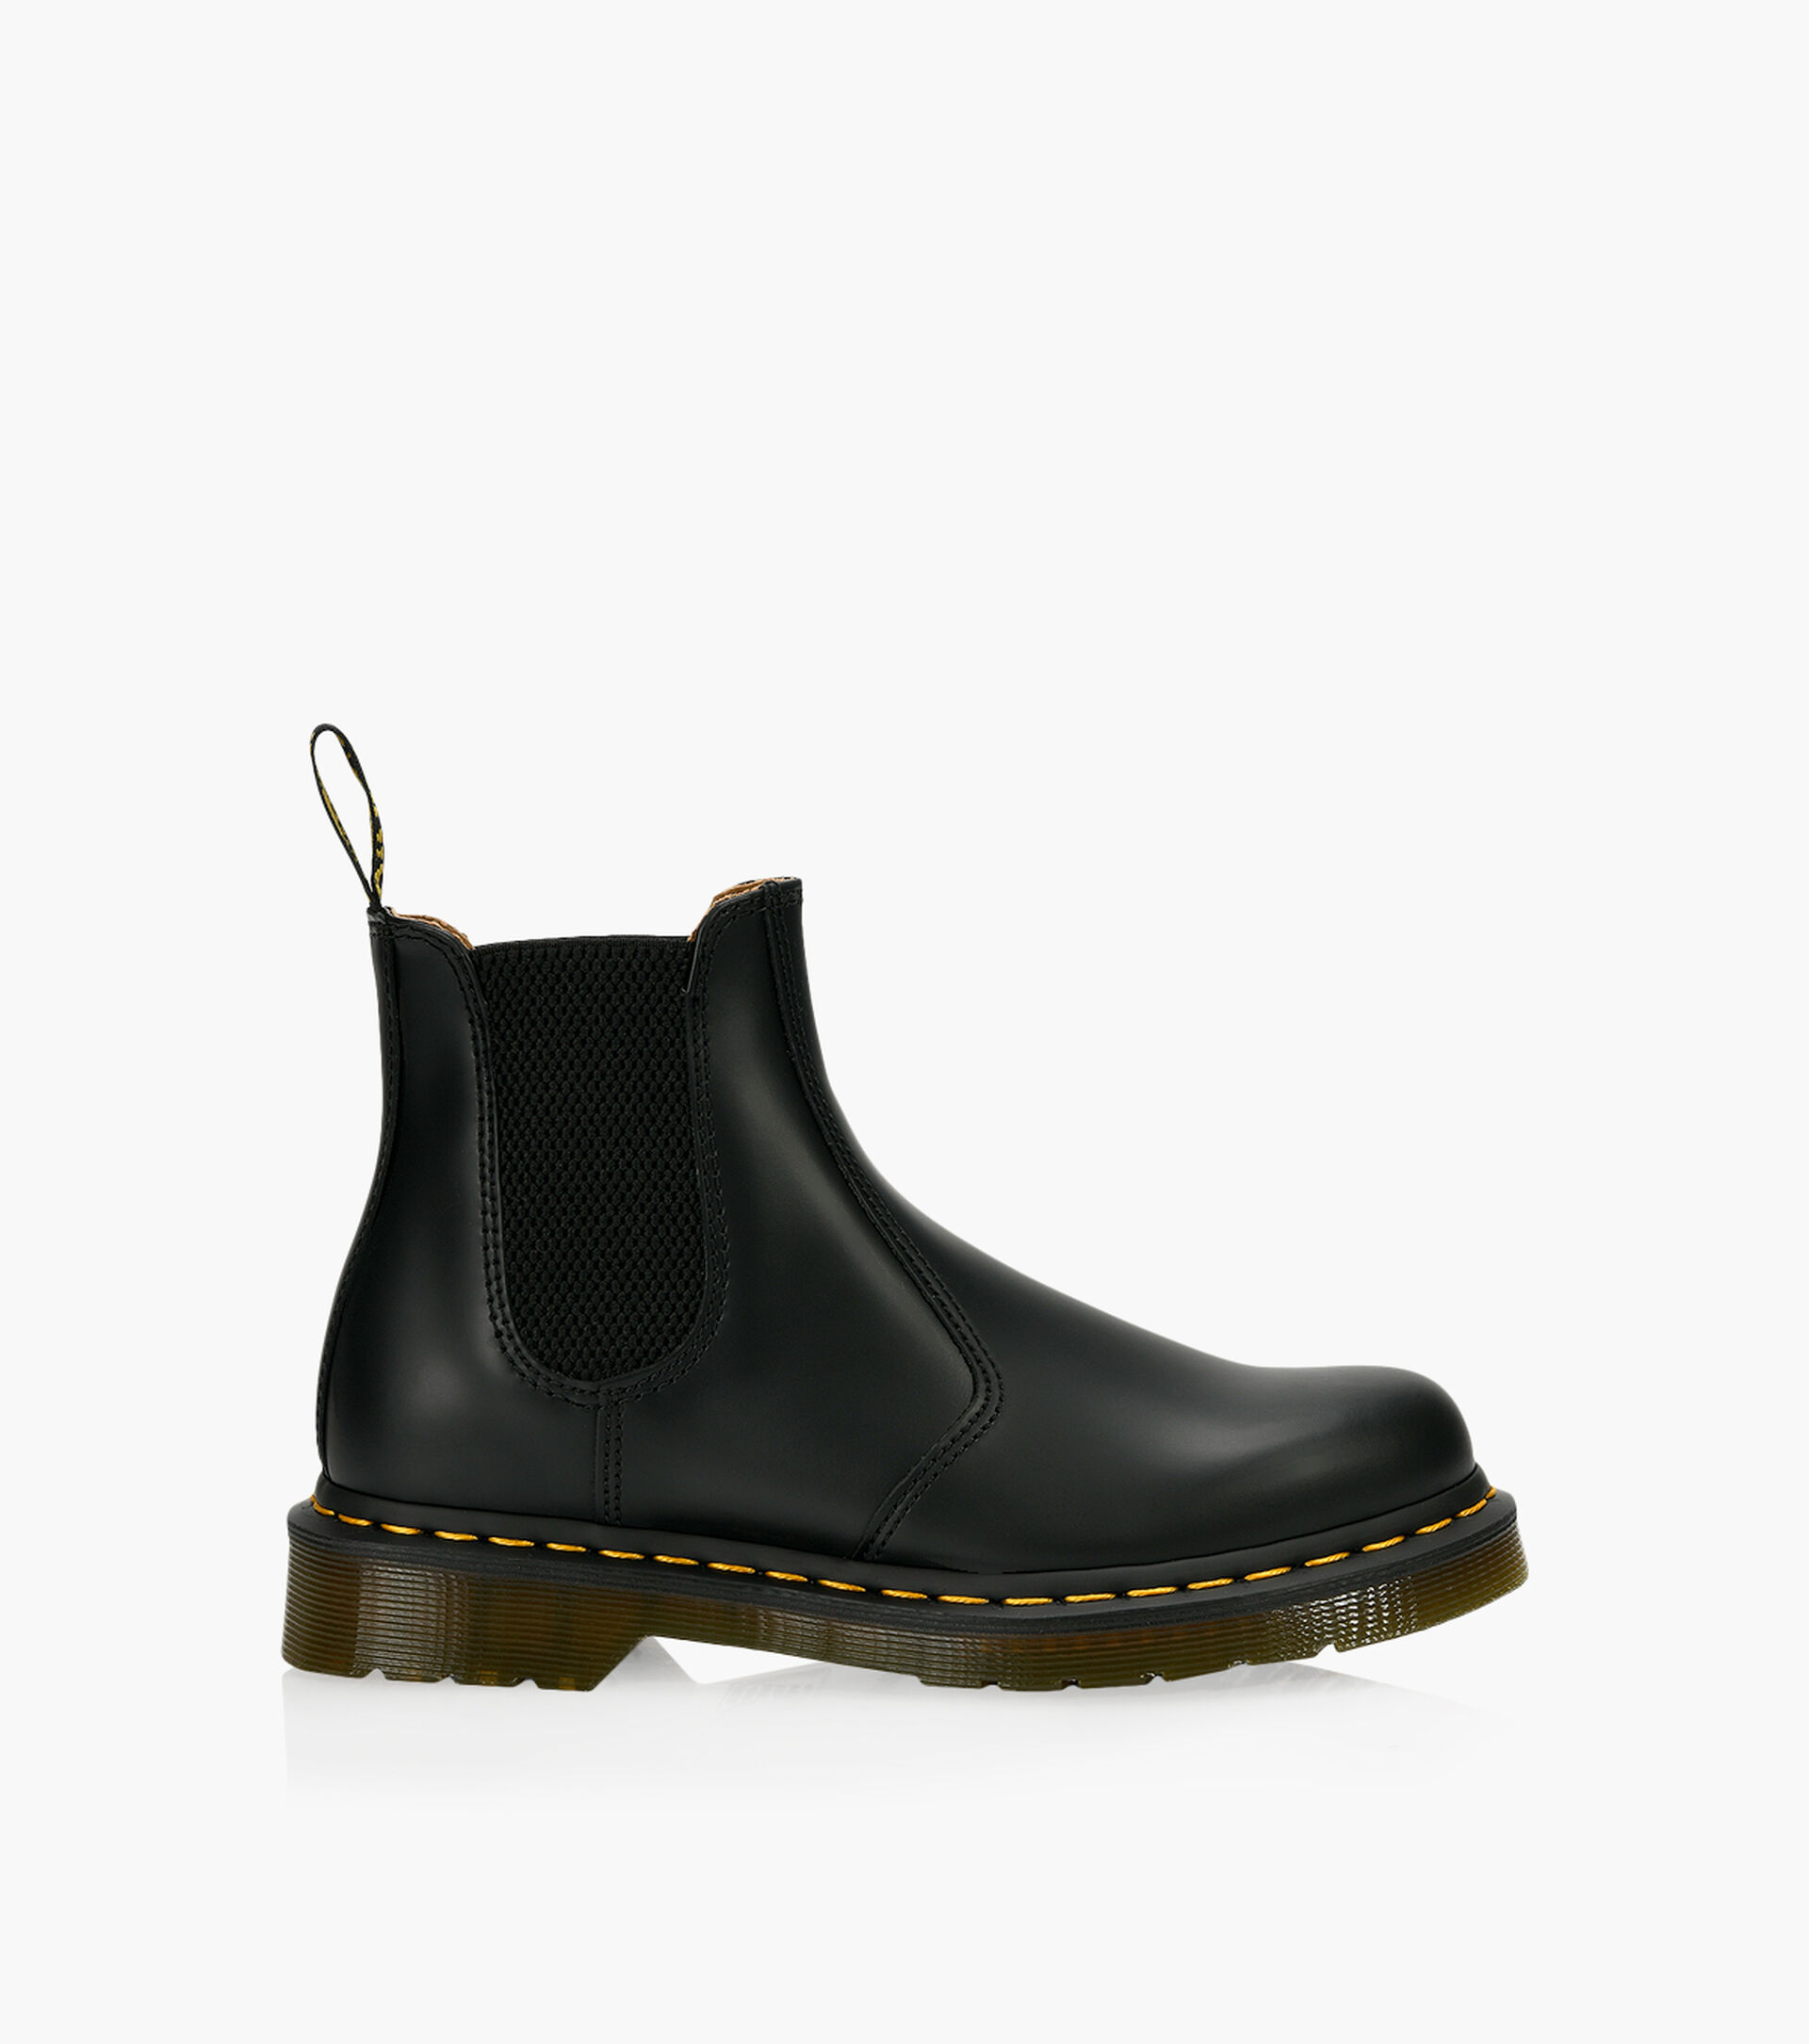 DR. MARTENS 2976 YELLOW STITCH - Black Leather | Browns Shoes